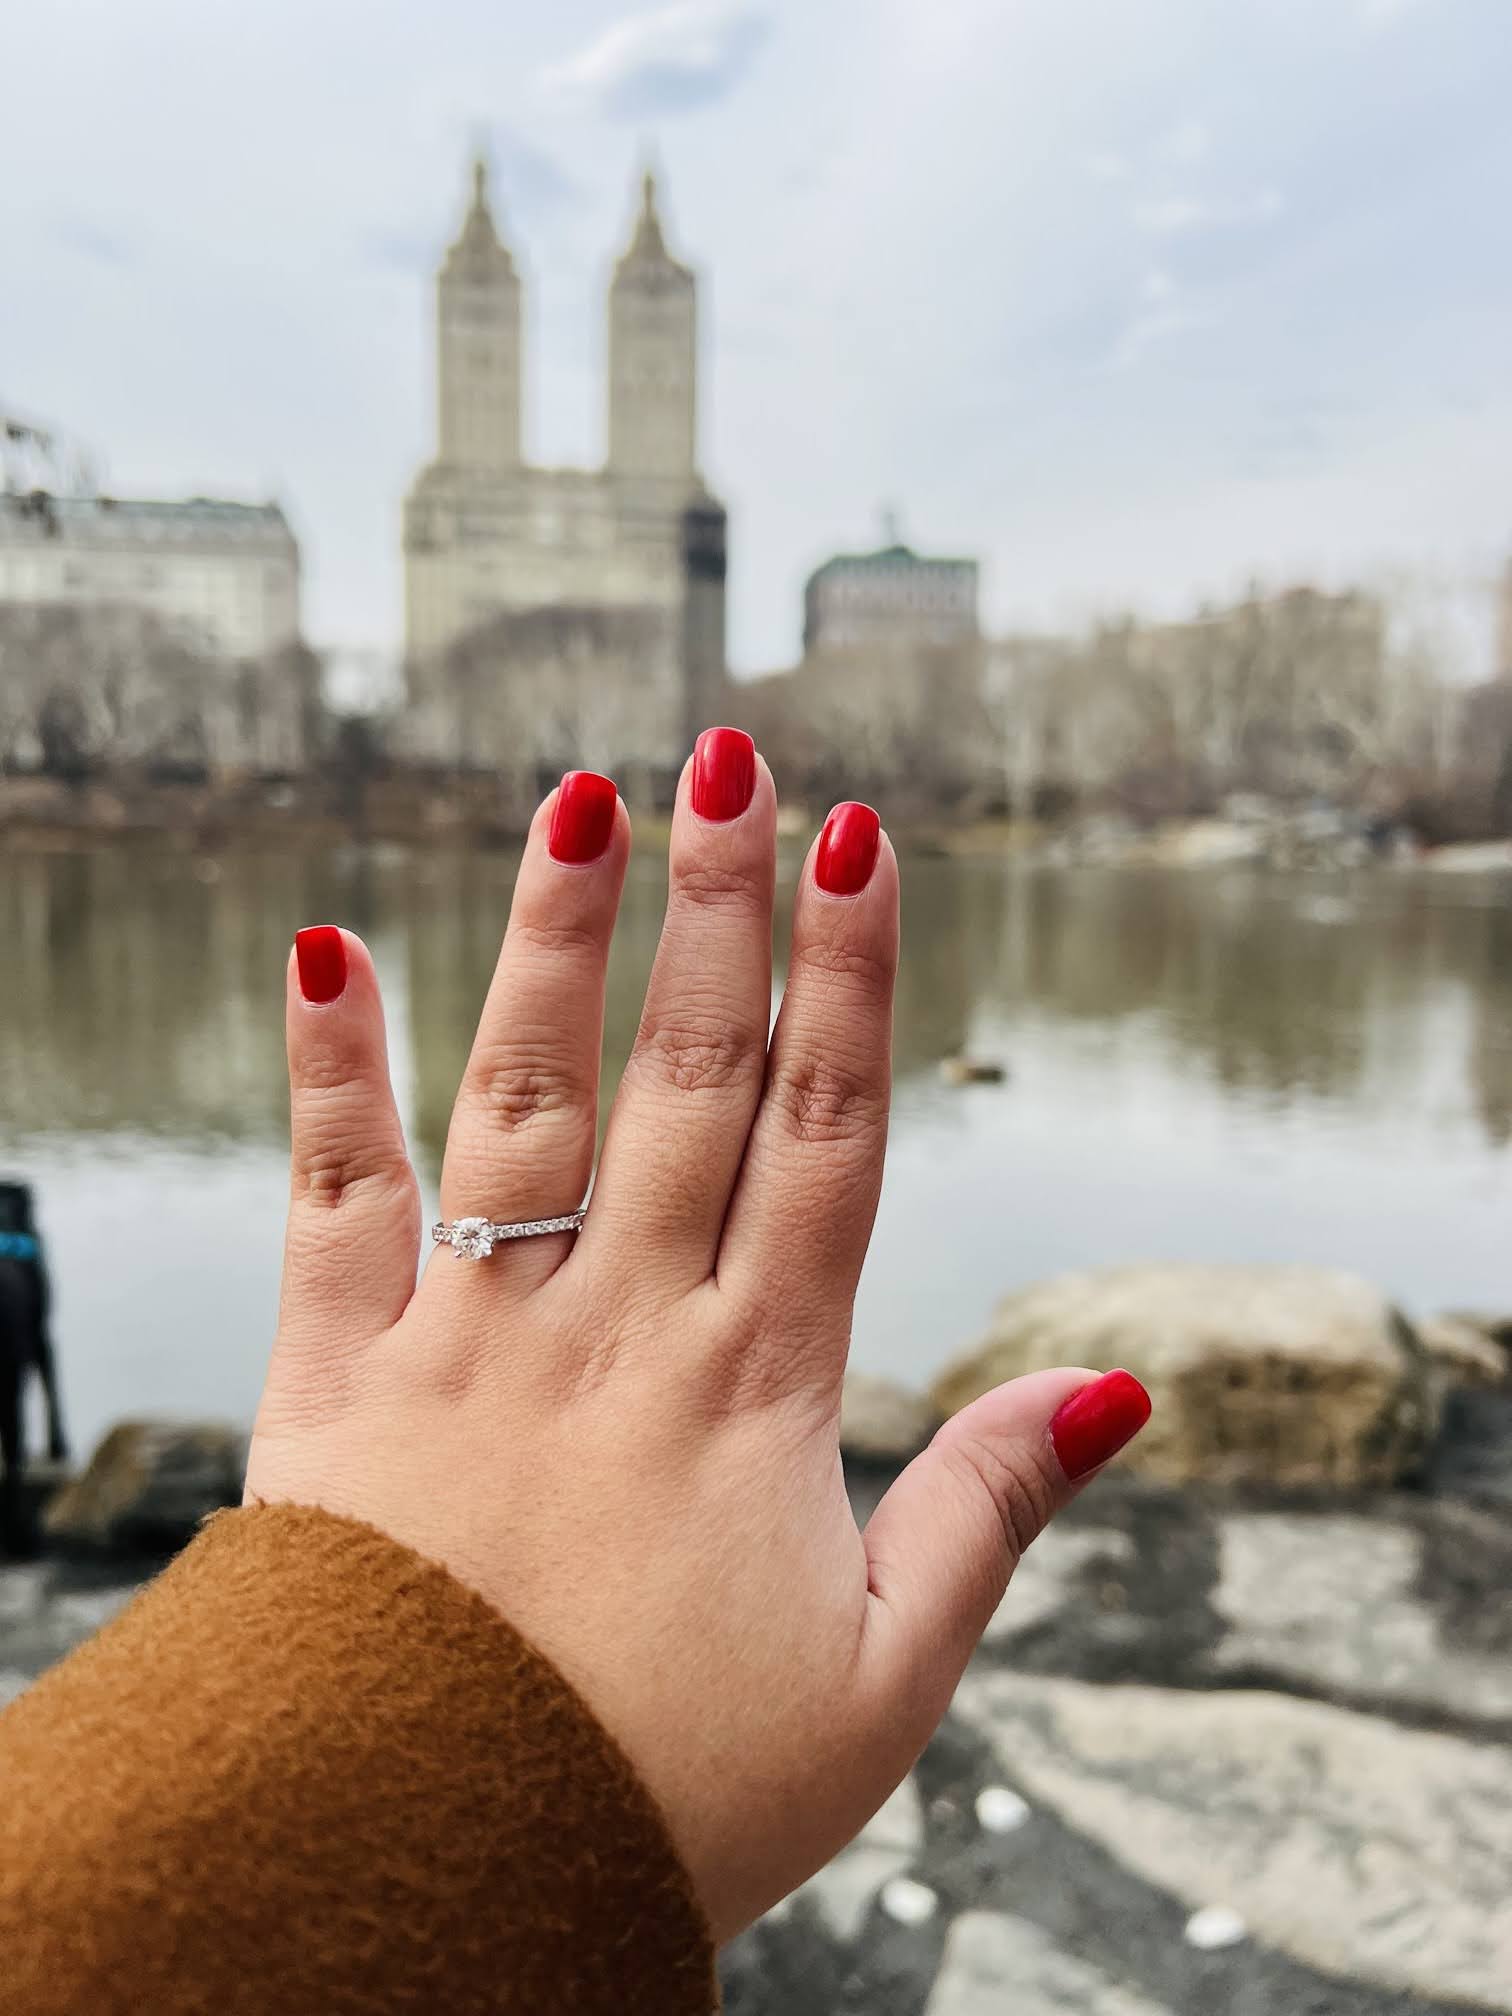 A person's hand with red nails and a city in the background